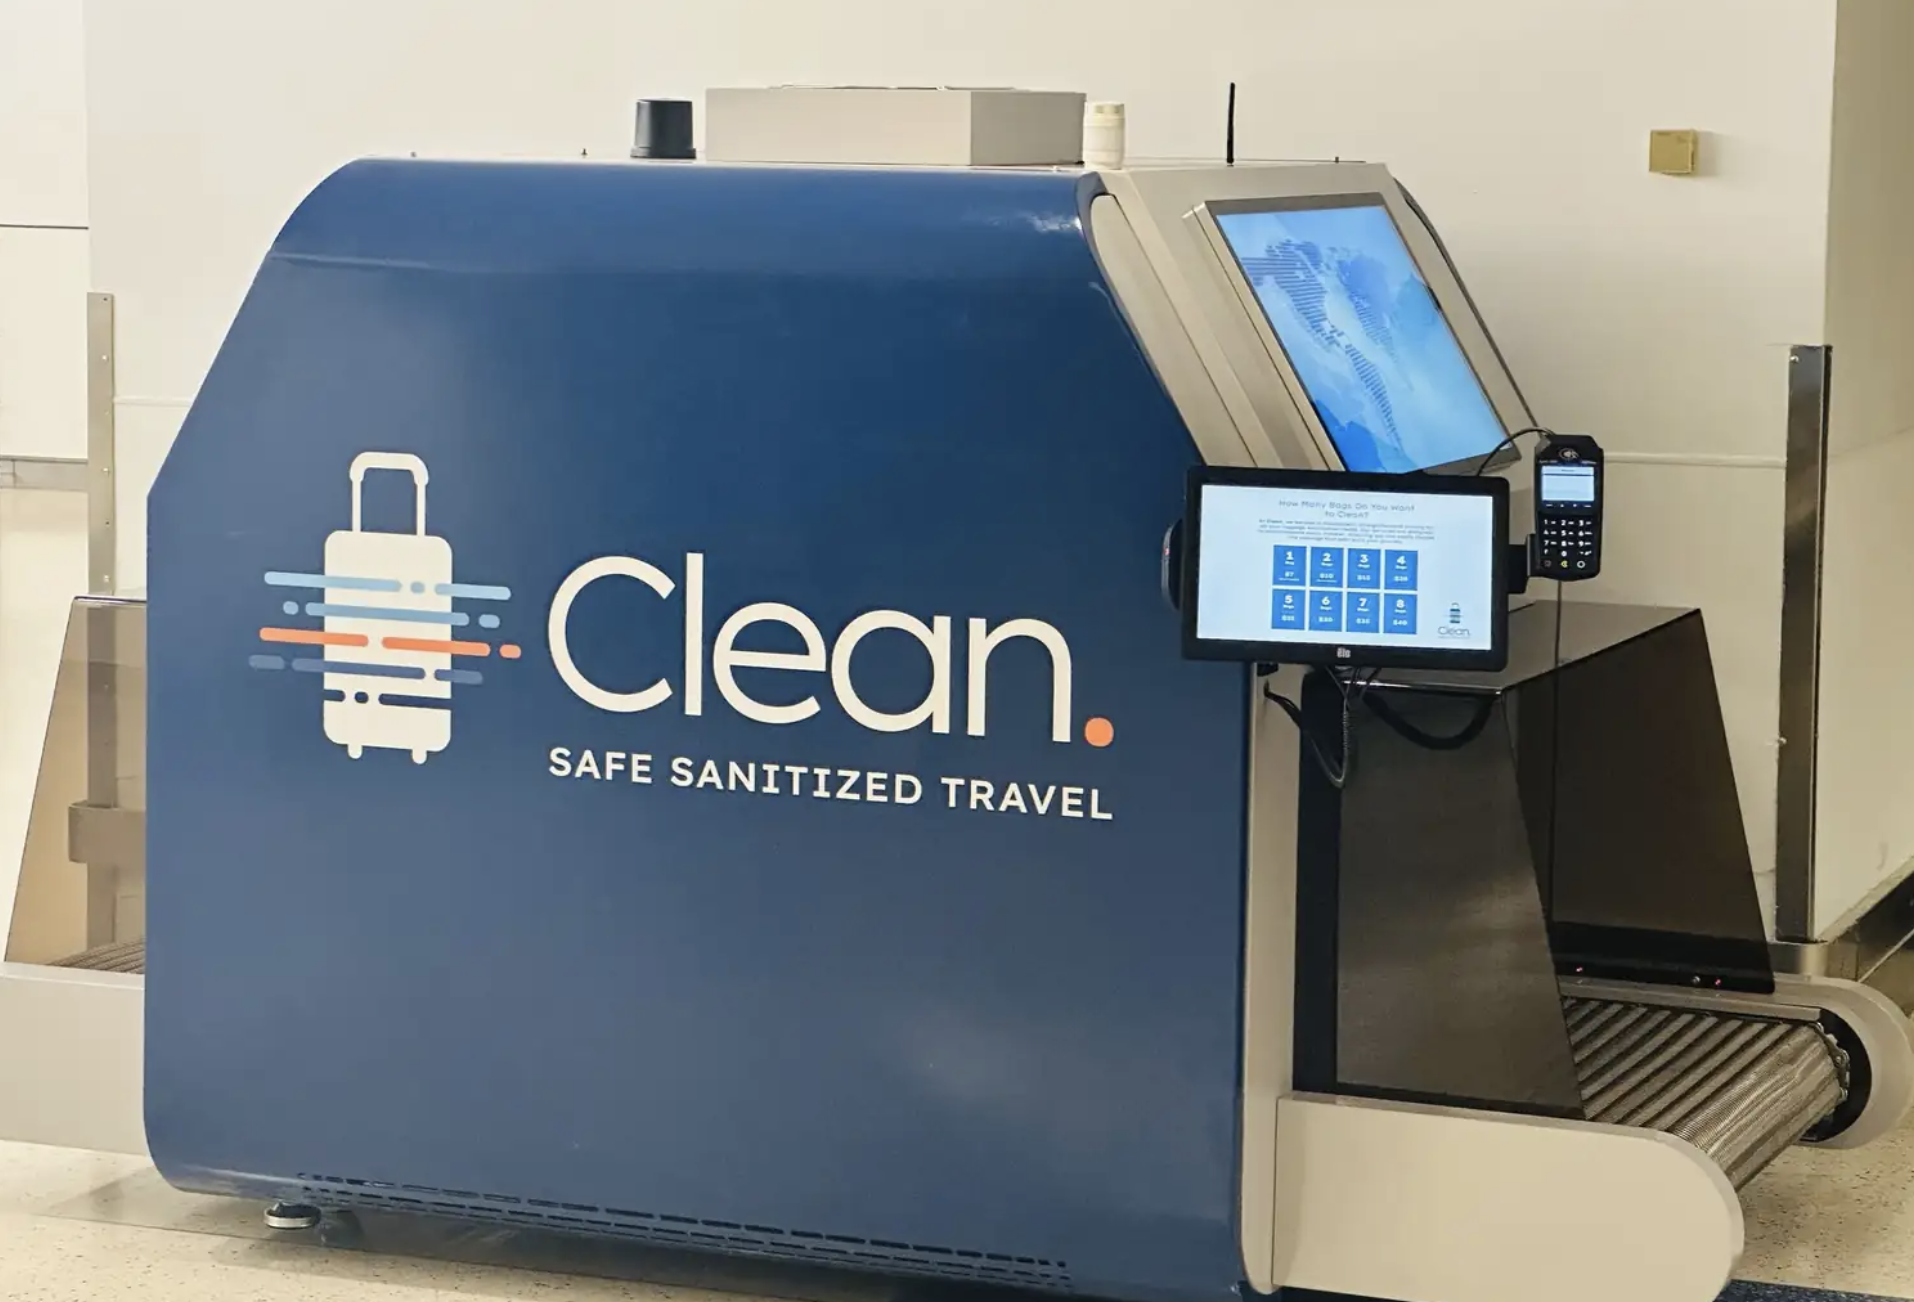 You can now sanitize your luggage inside this new machine at JFK